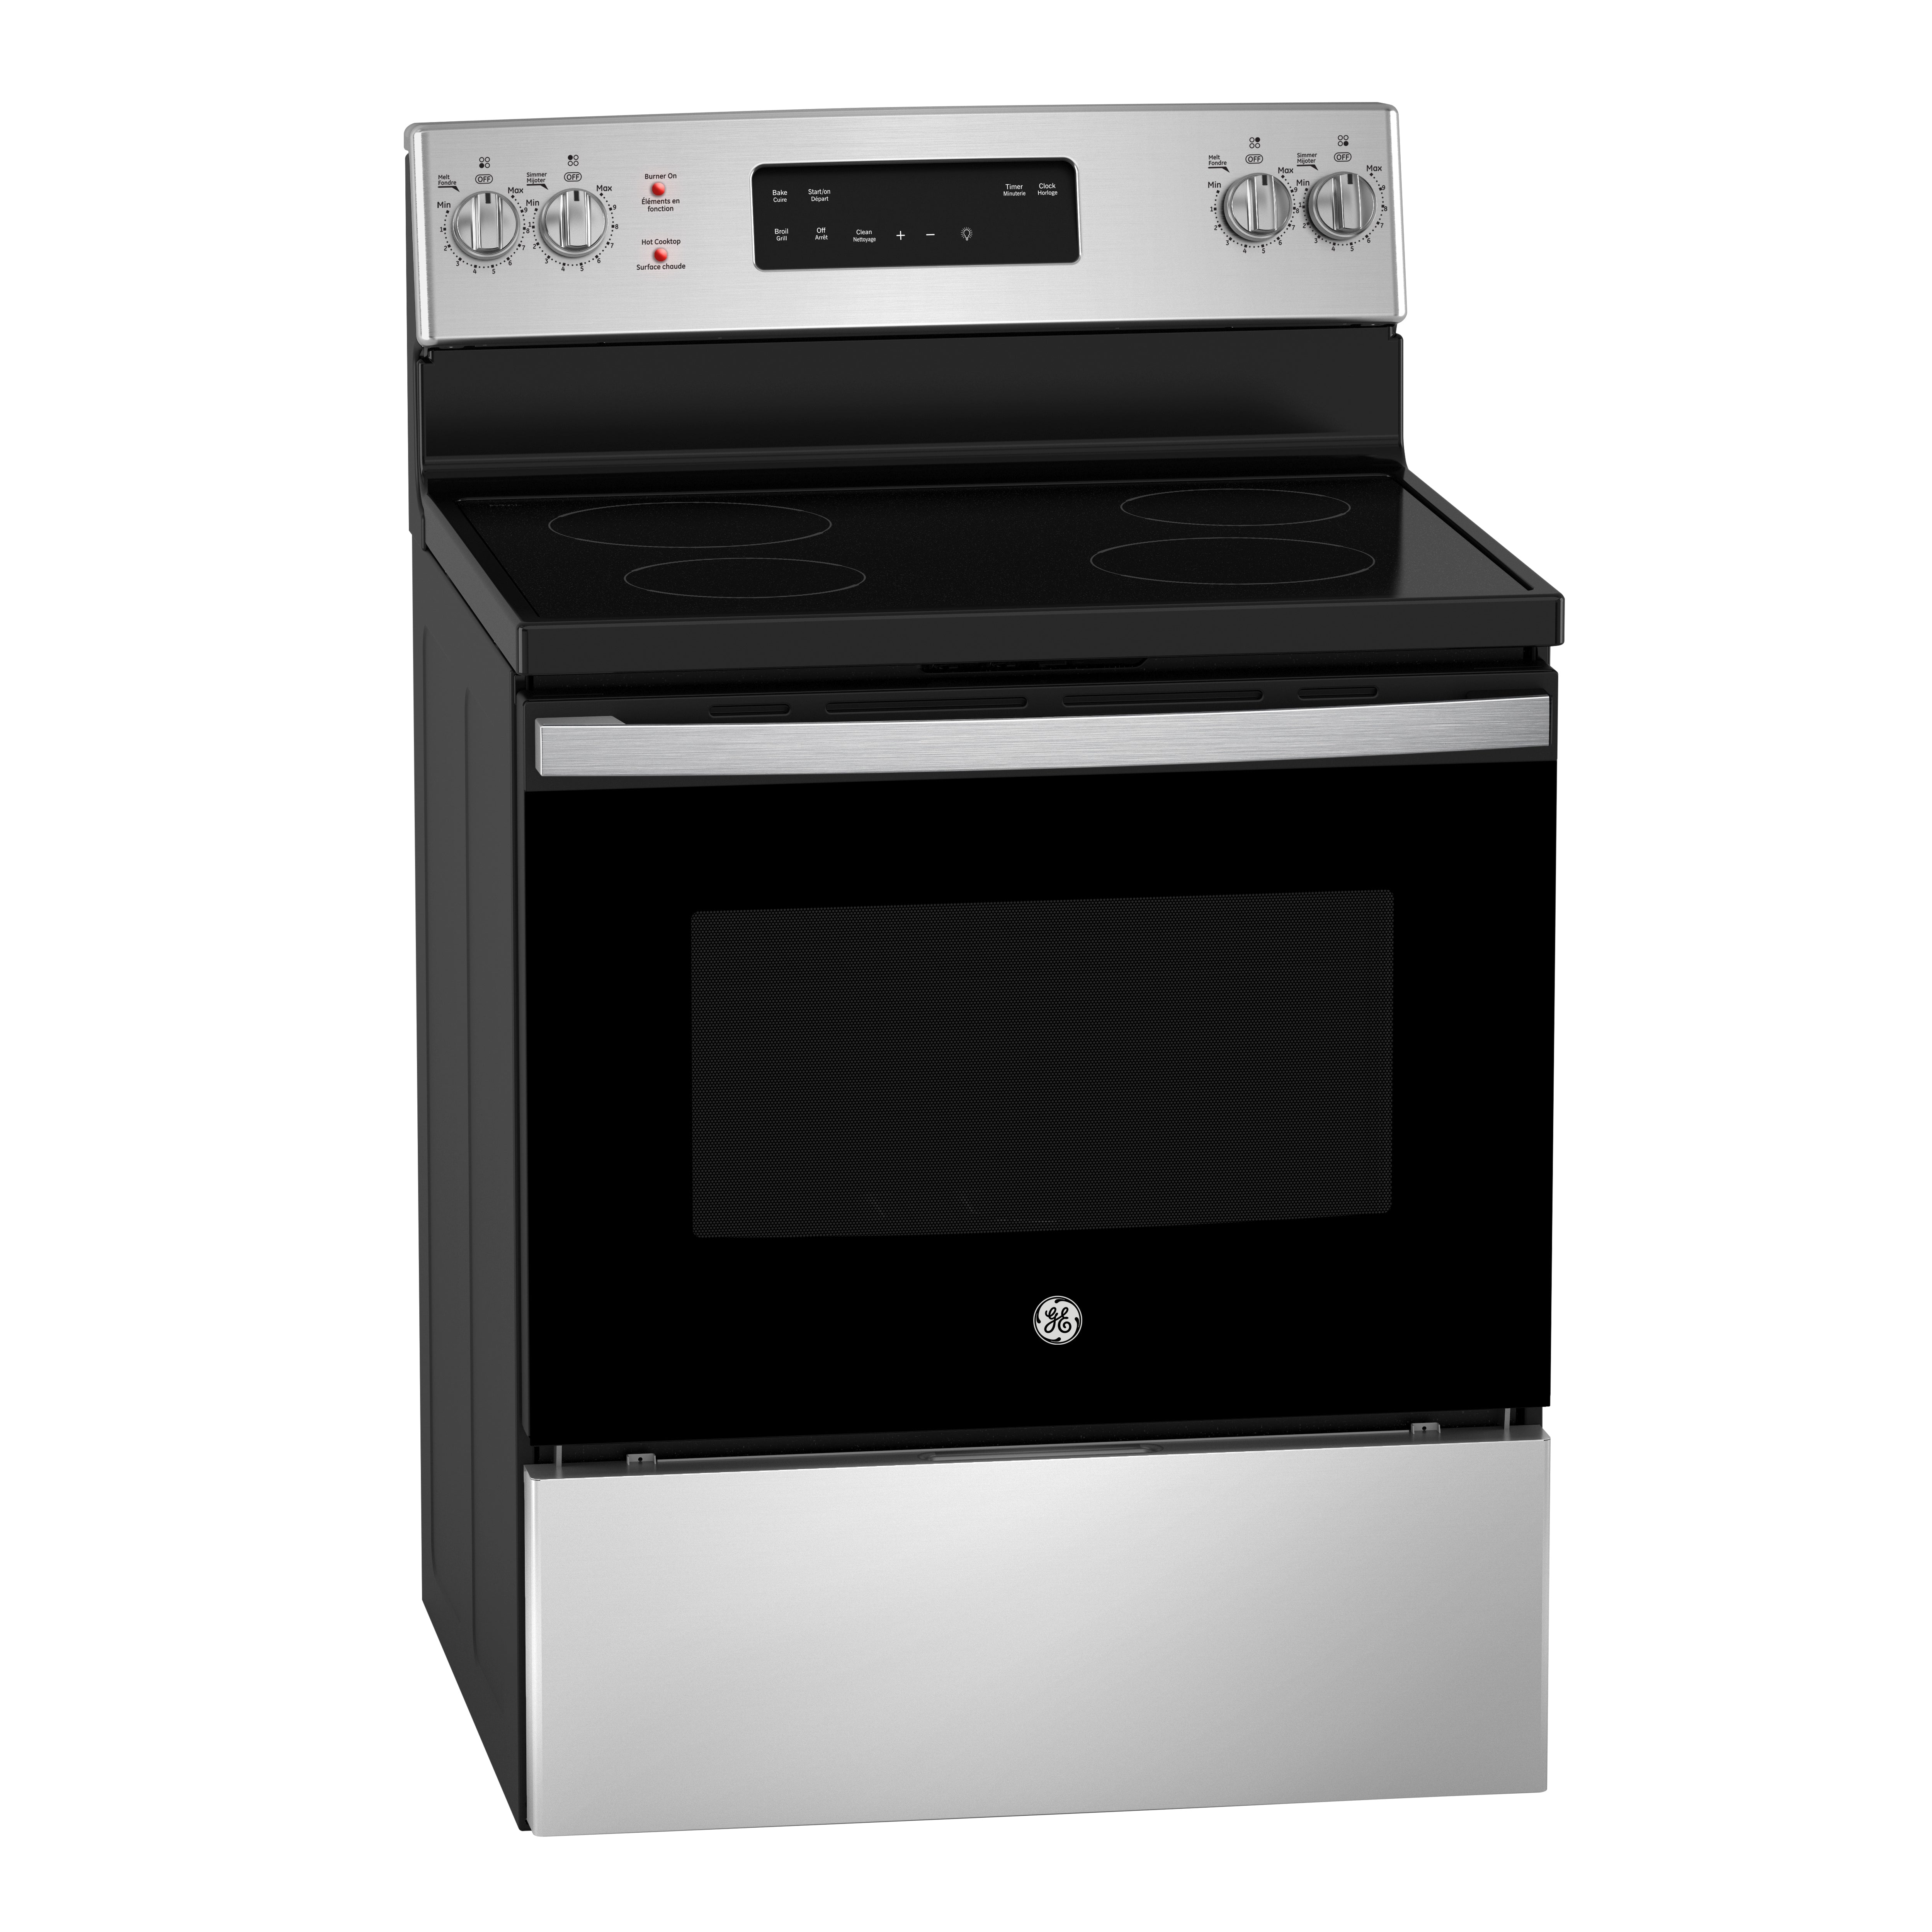 GE - 5 cu. ft  Electric Range in Stainless - JCB630SVSS